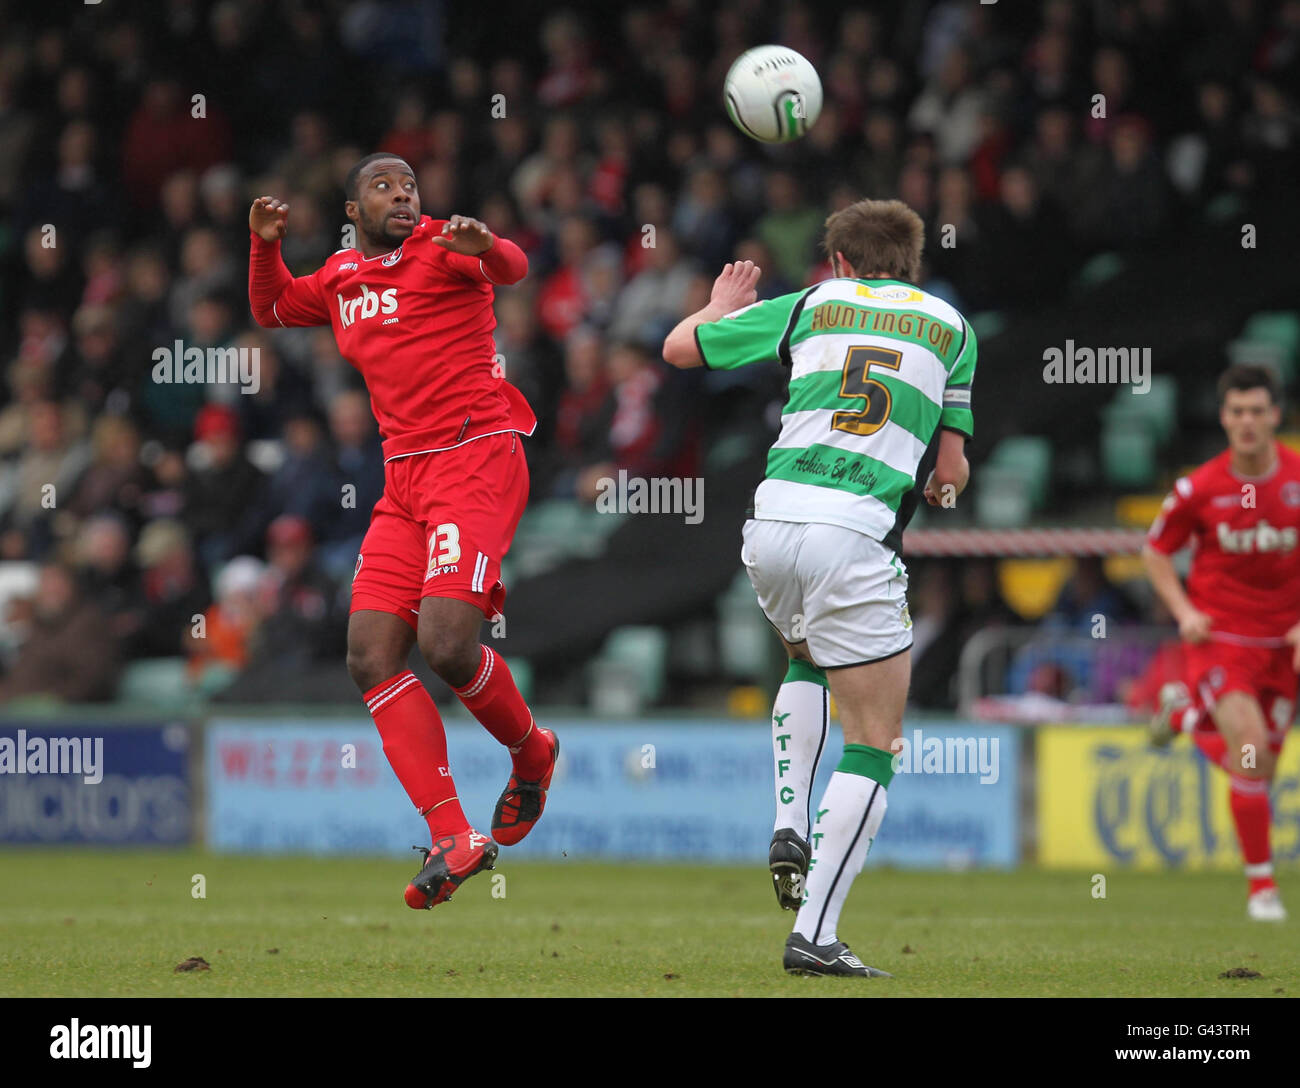 Charlton Athletic's Joe Anyinsah and Yeovil Town's Paul Huntington battle for the ball during the Npower Football League One match at Huish Park, Yeovil. Stock Photo